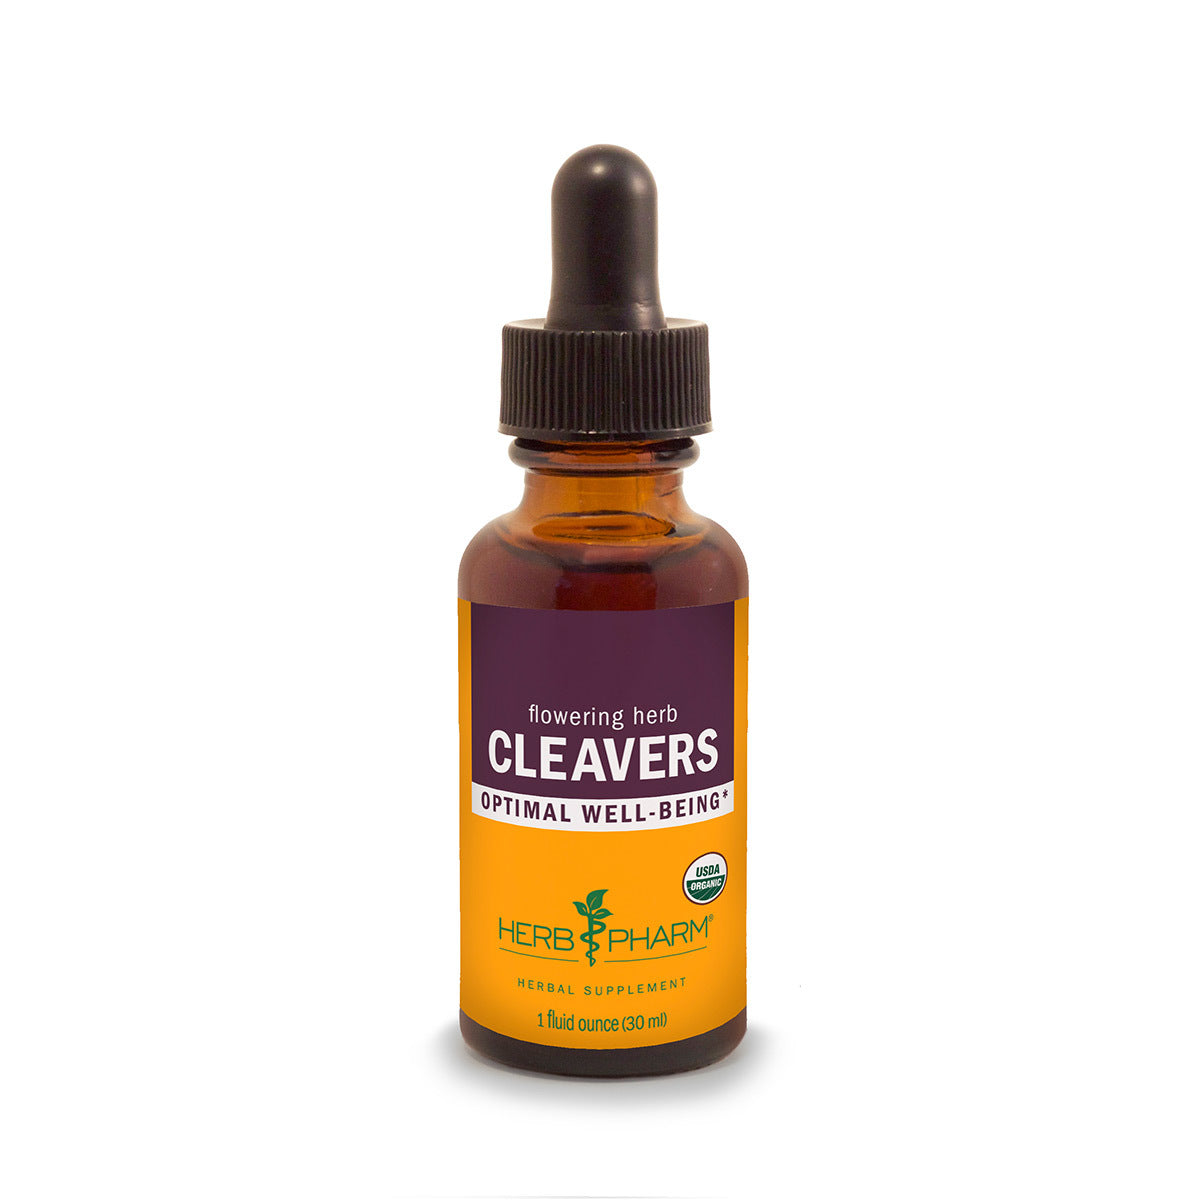 Primary image of Cleavers Extract